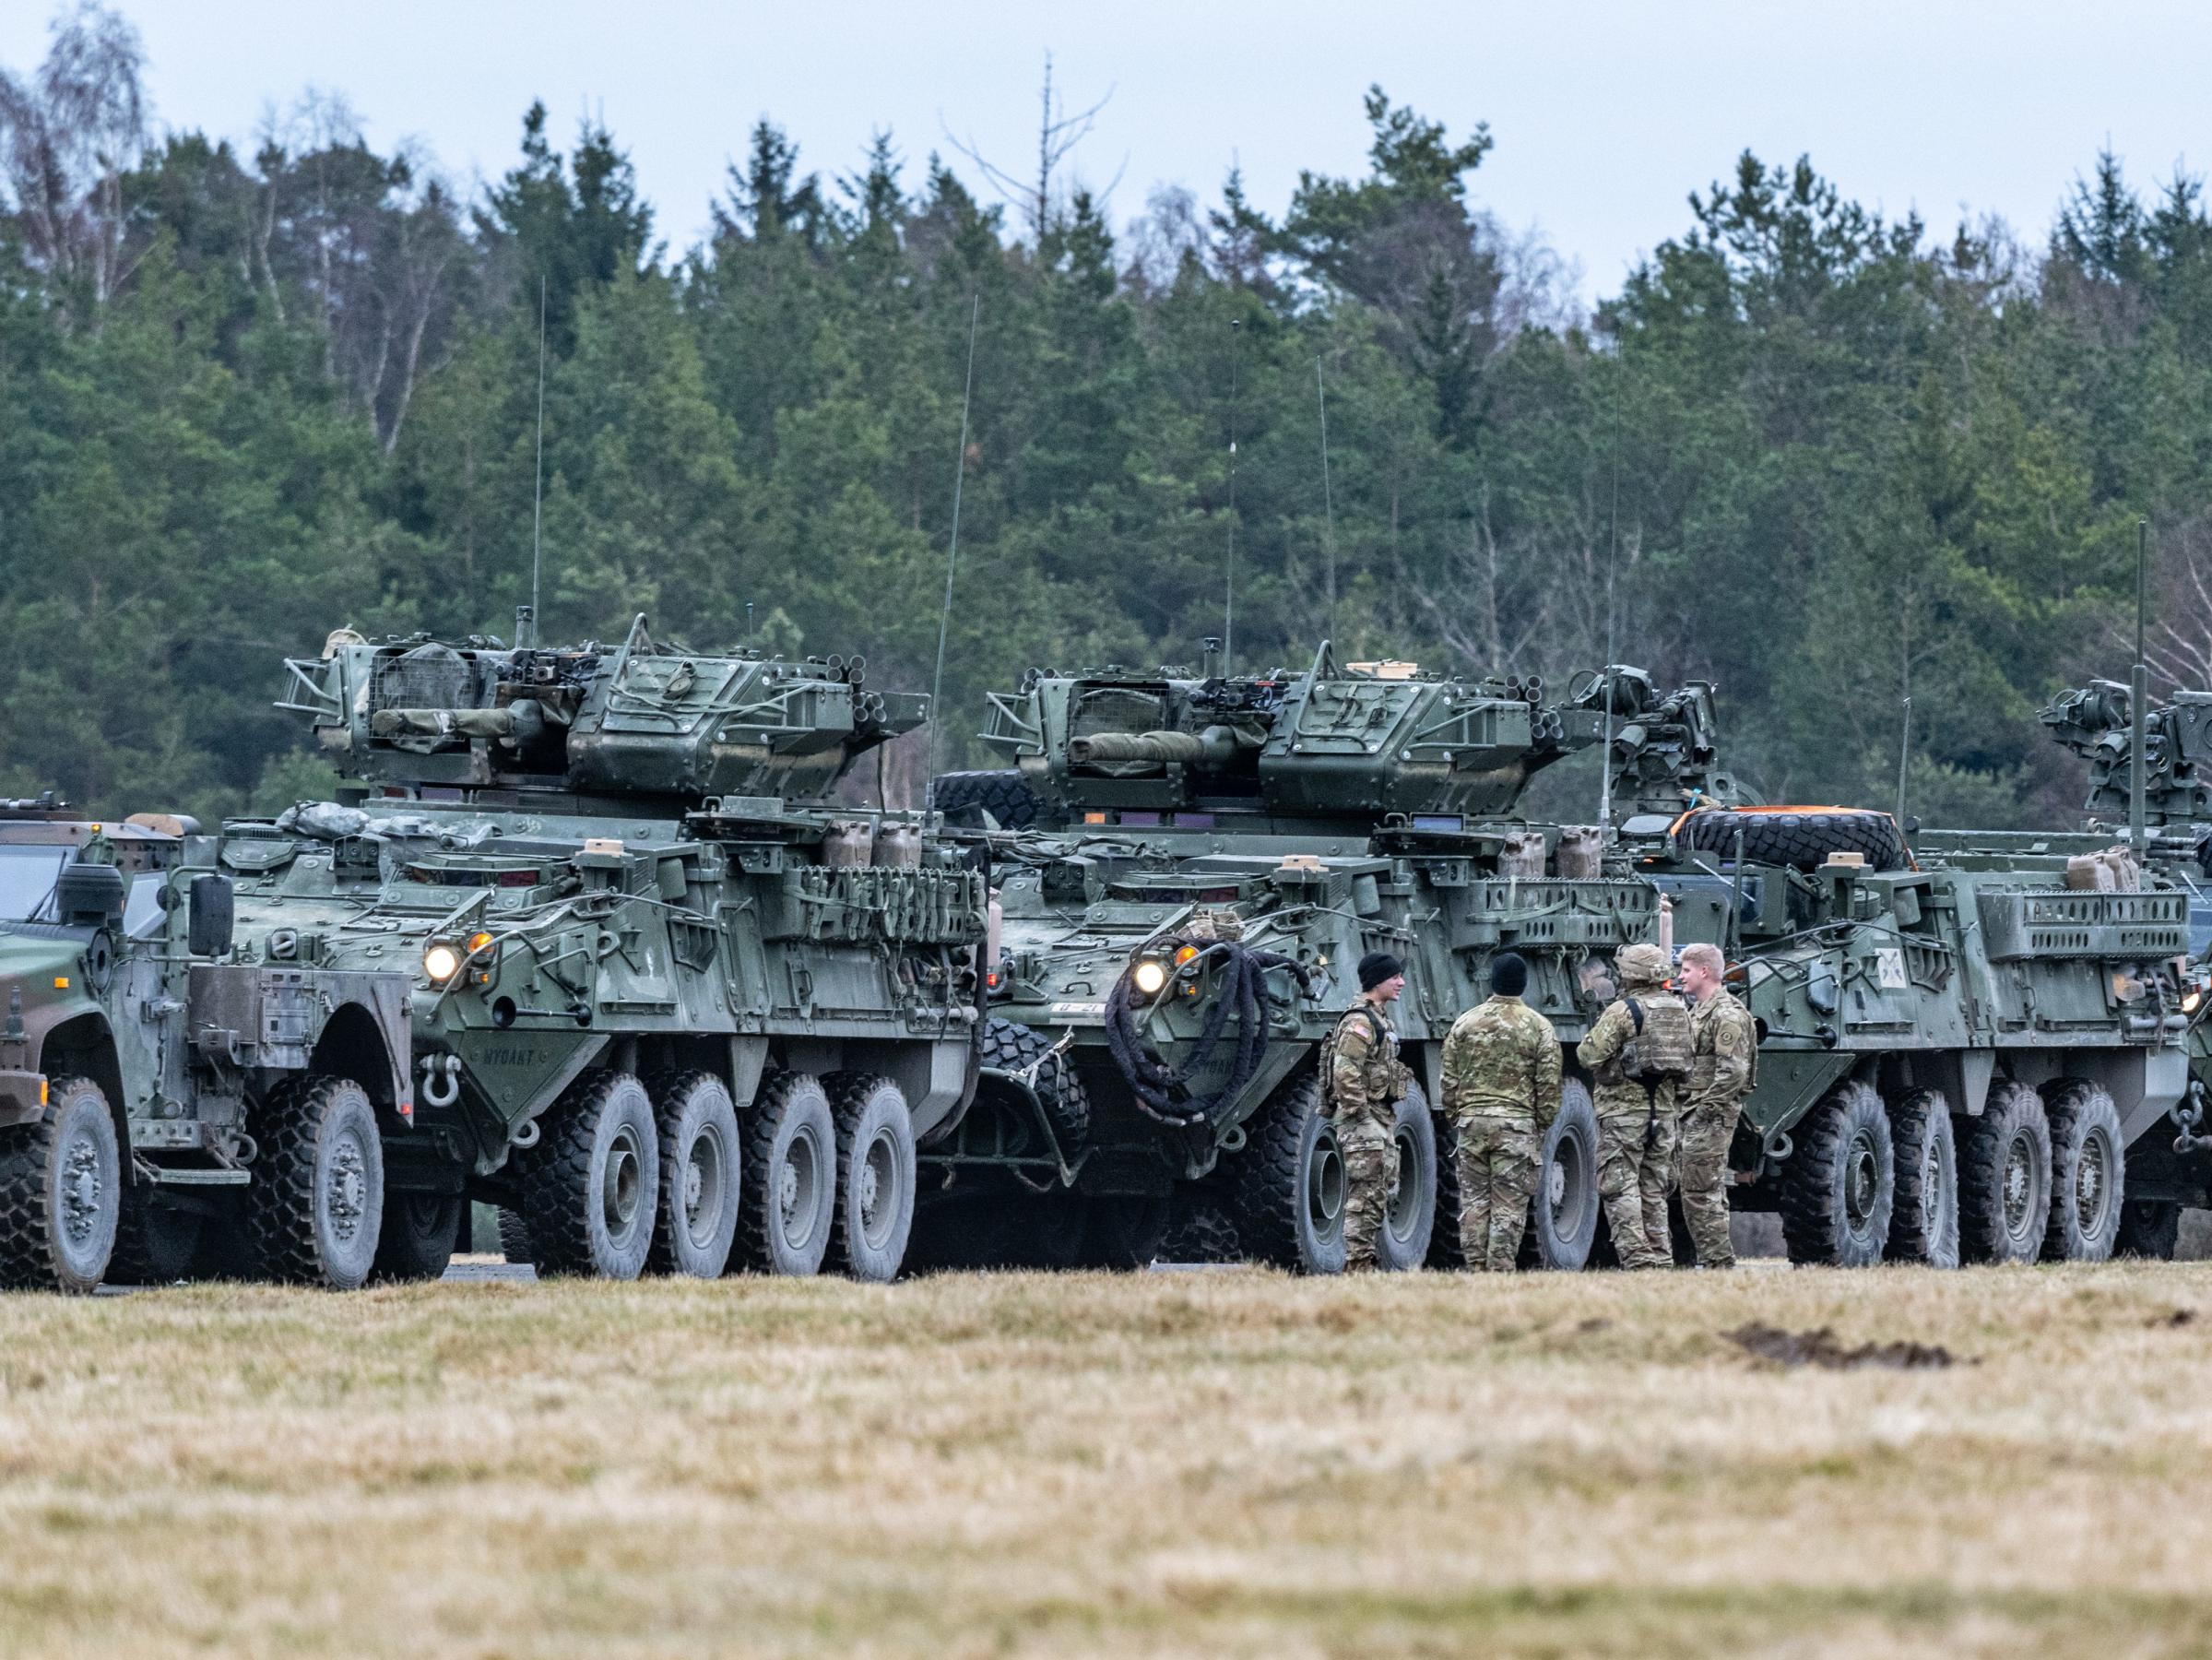 A series of Stryker armored vehicles.